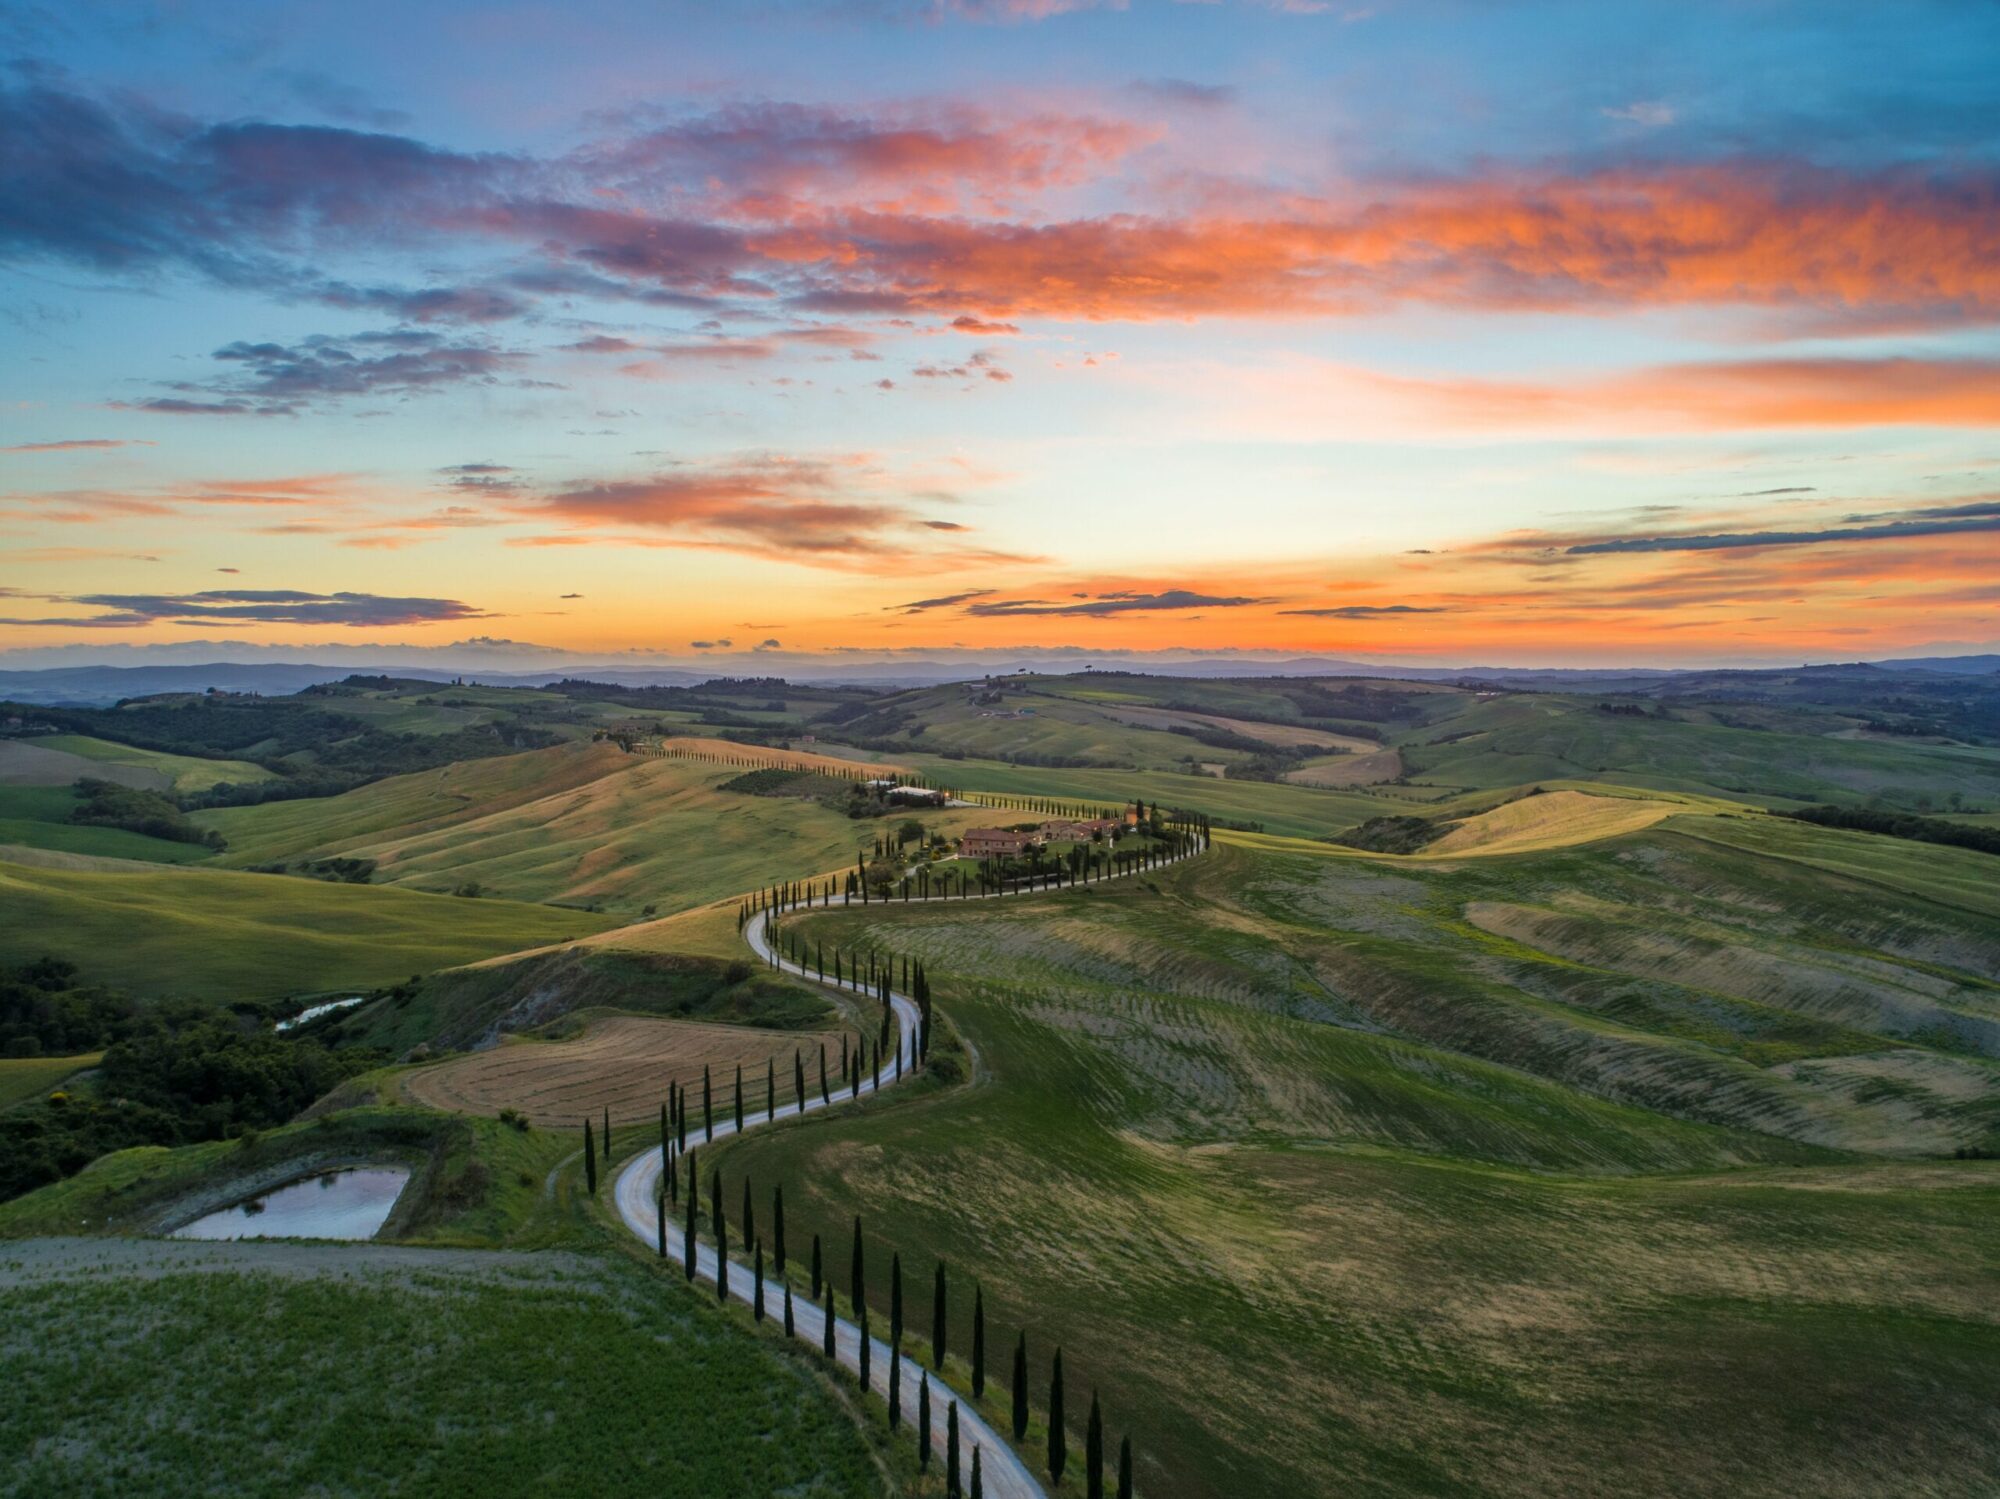 Landscapes in Tuscany are especially beautiful from the skies